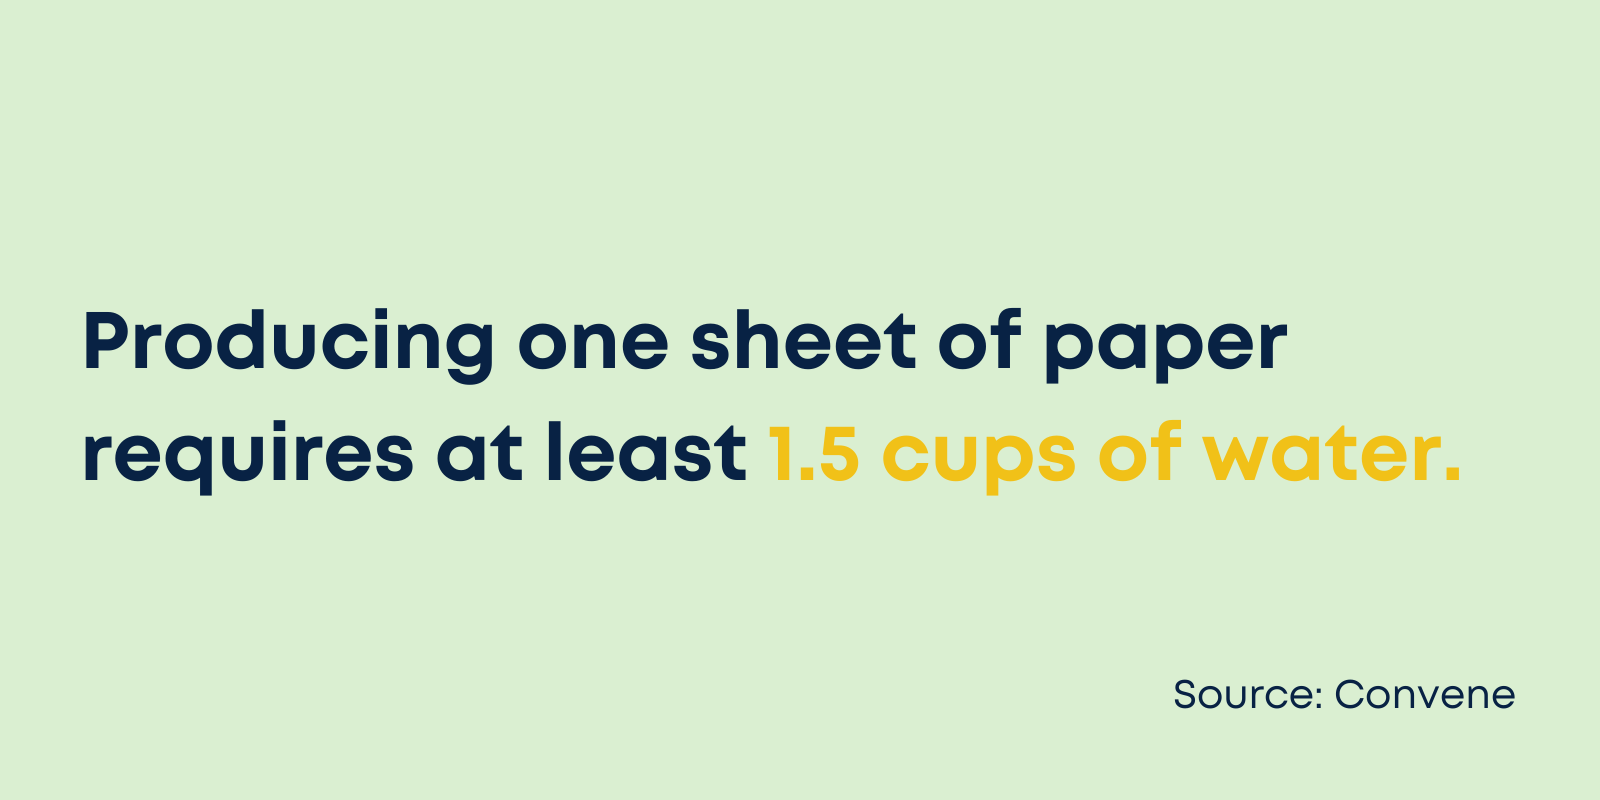 Producing one sheet of paper requires at least 1.5 cups of water. 